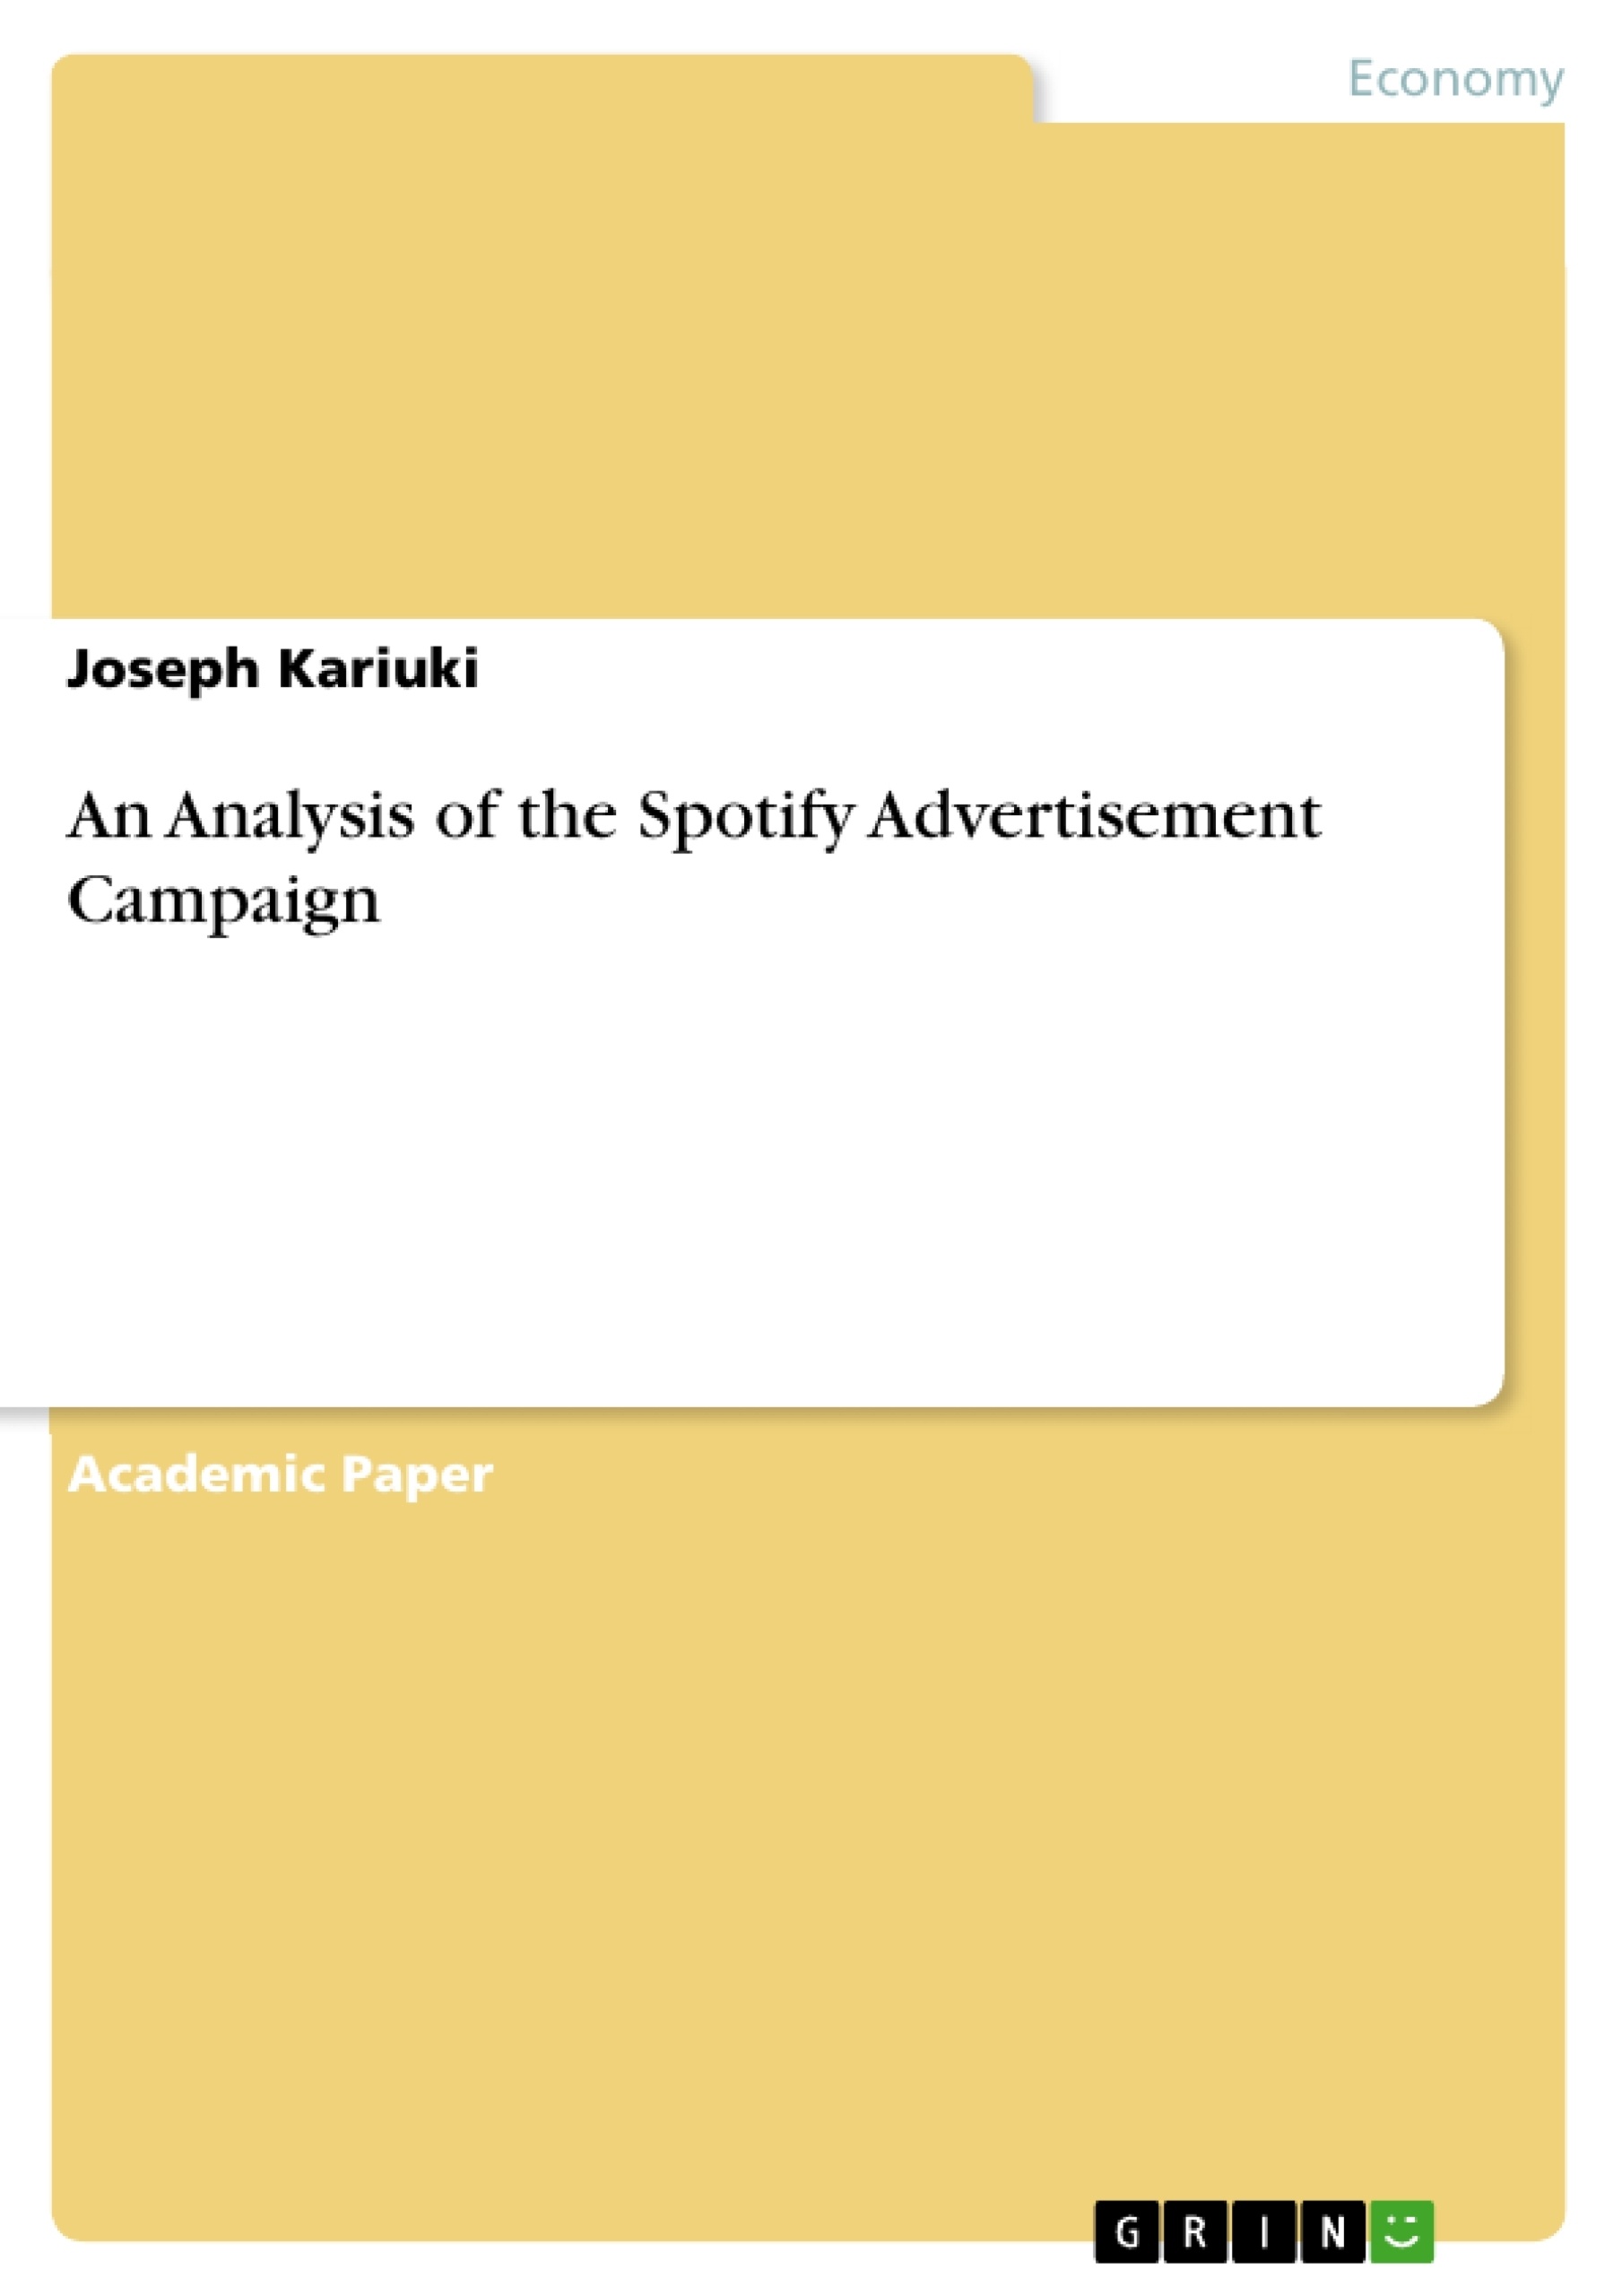 Title: An Analysis of the Spotify Advertisement Campaign